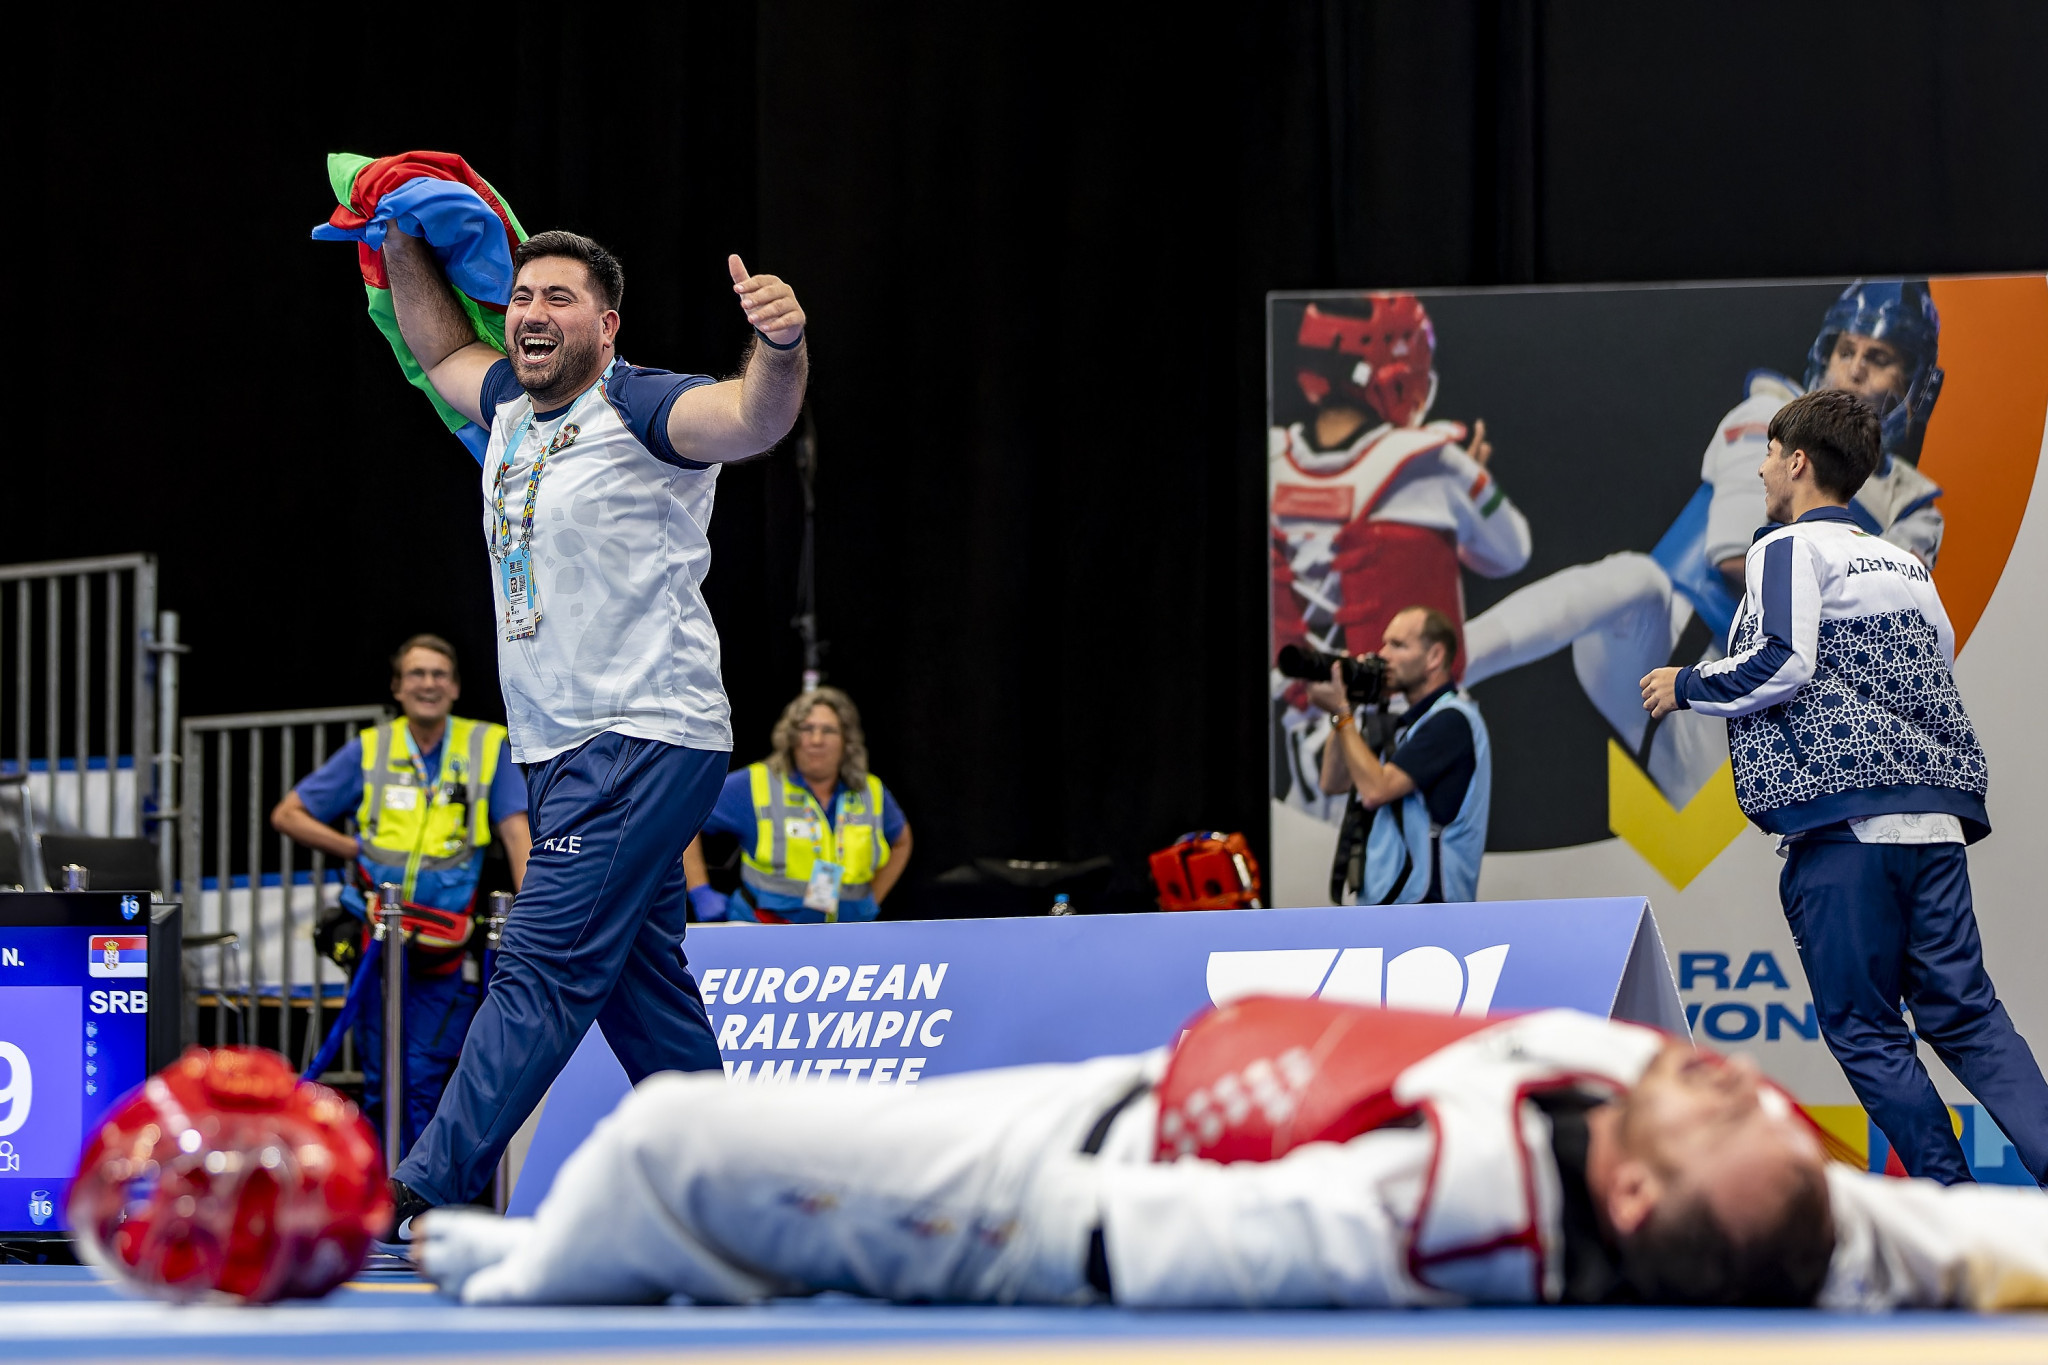 Azerbaijan's Abulfaz Abuzarli lies on the floor in disbelief after pulling off a remarkable victory as his coach celebrates wildly ©EPC